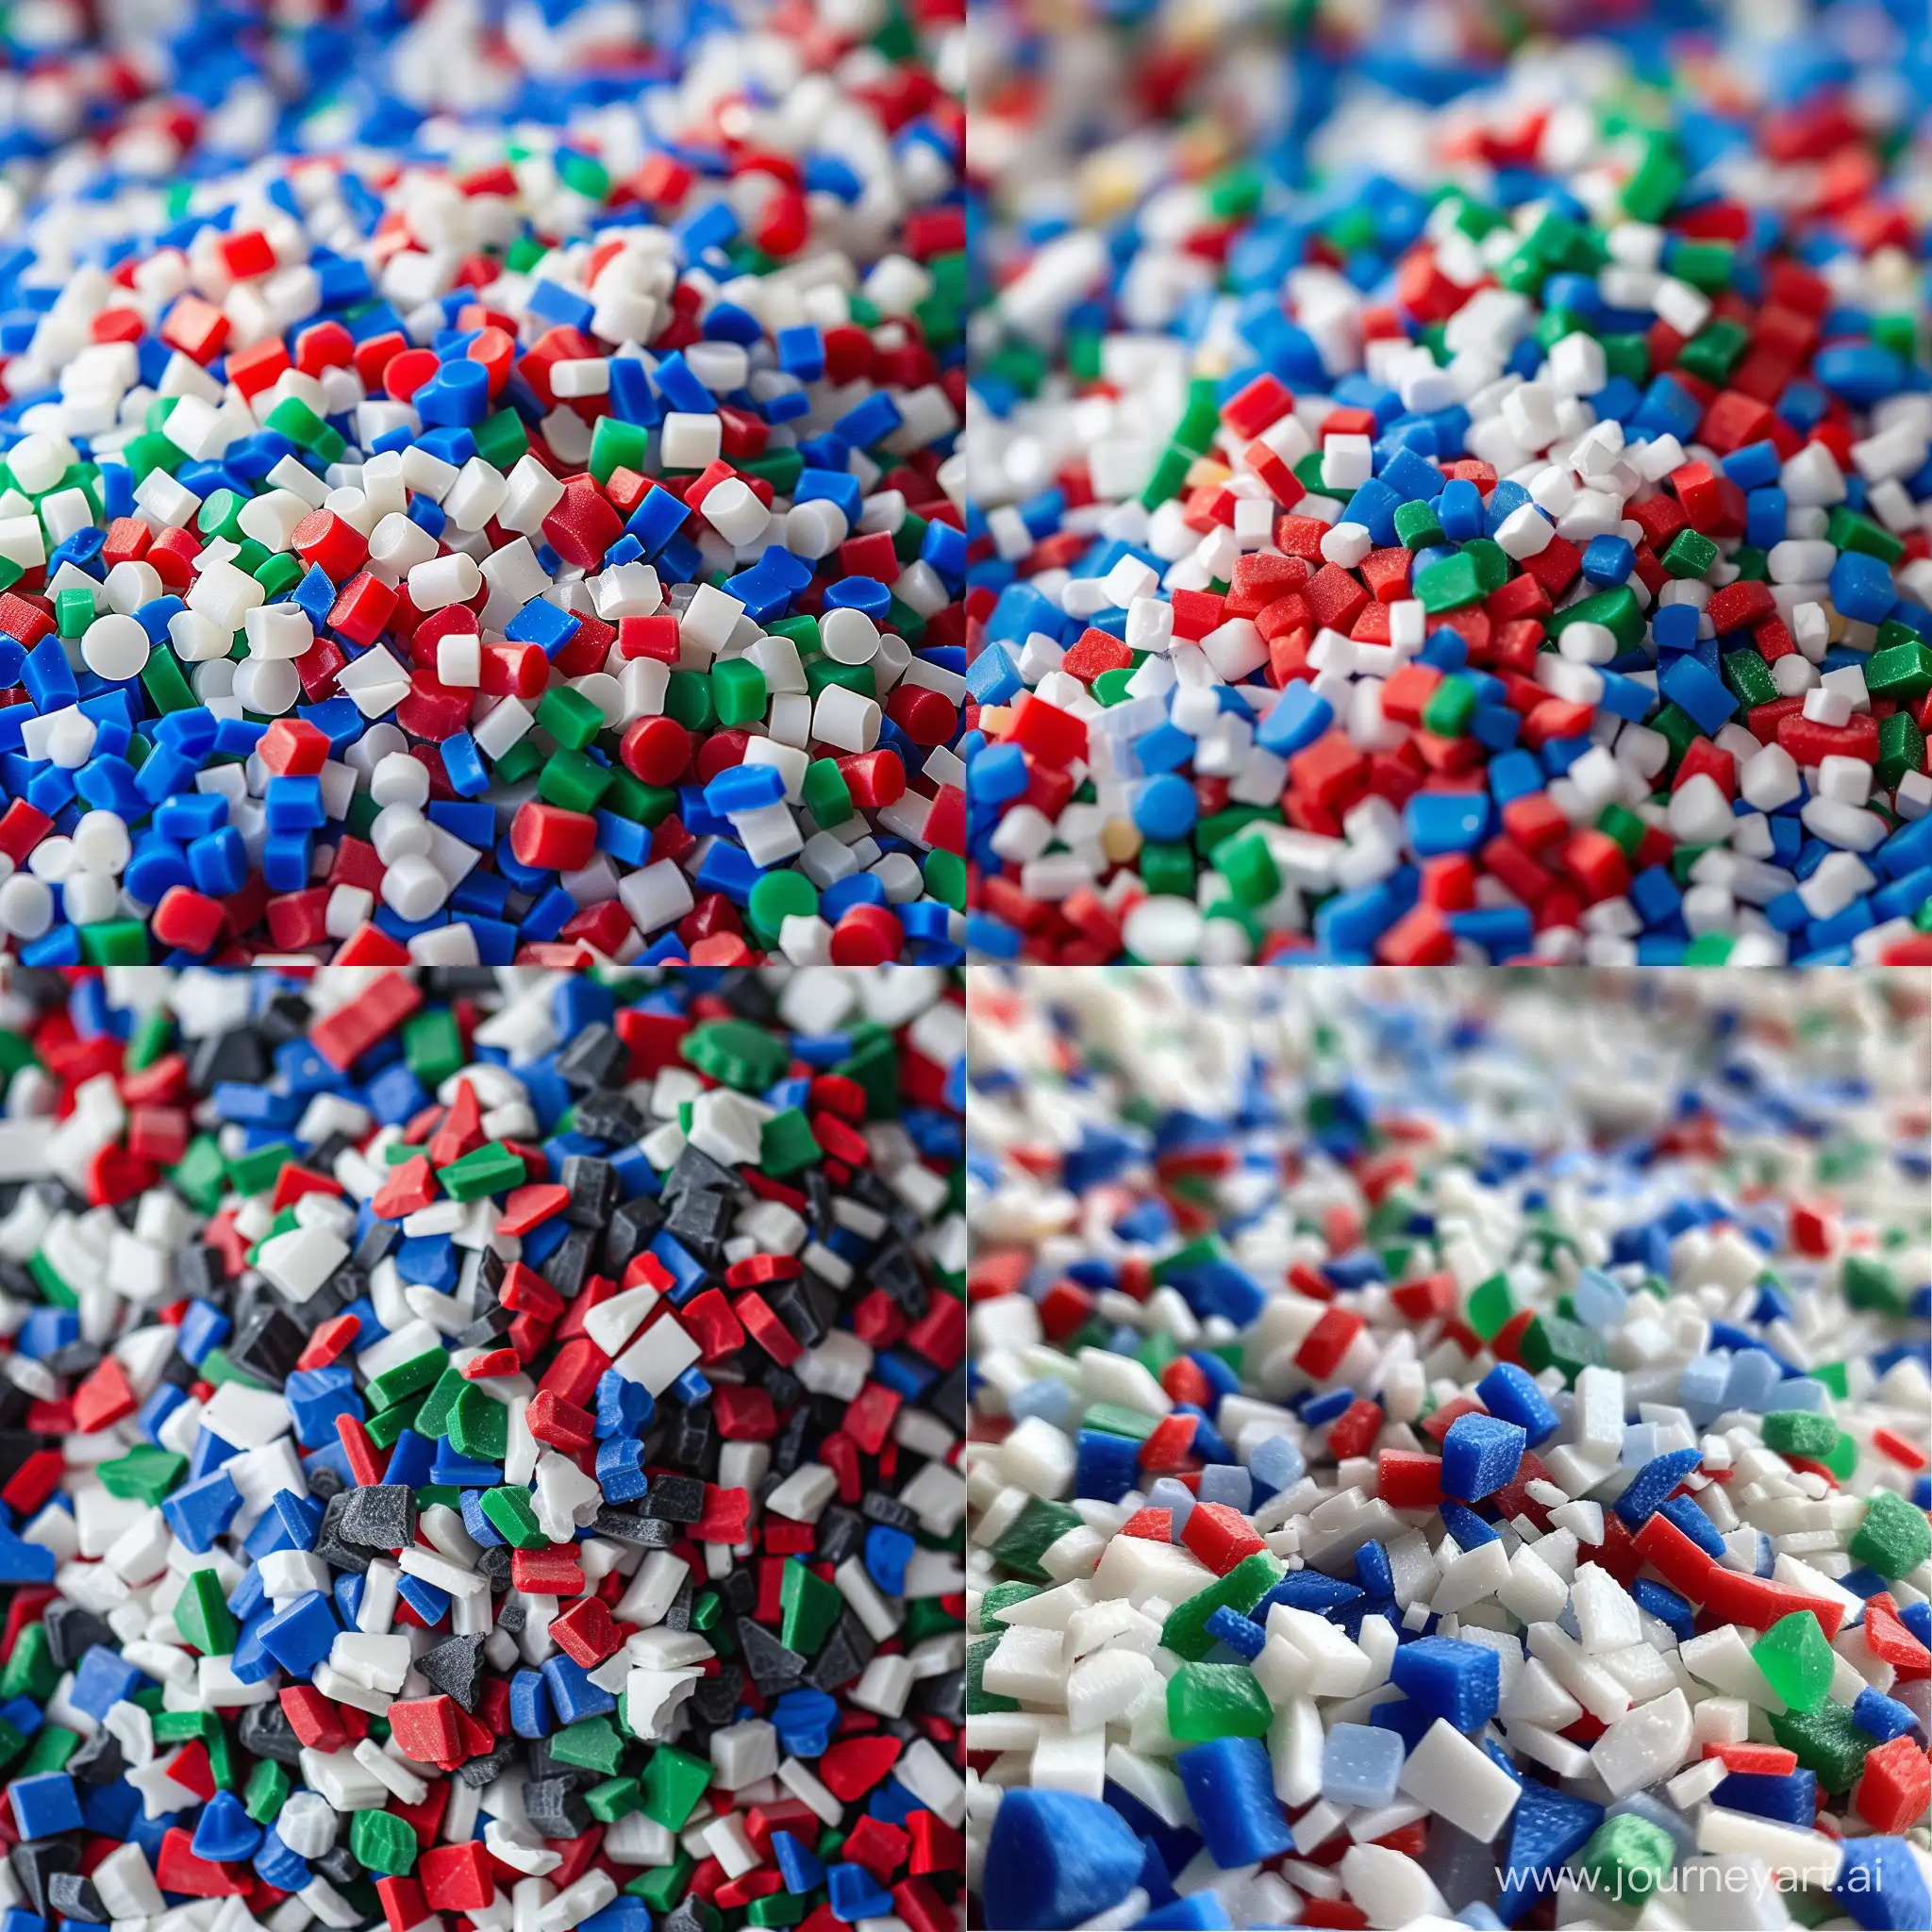 Colorful-Pile-of-Plastic-Granules-on-White-Surface